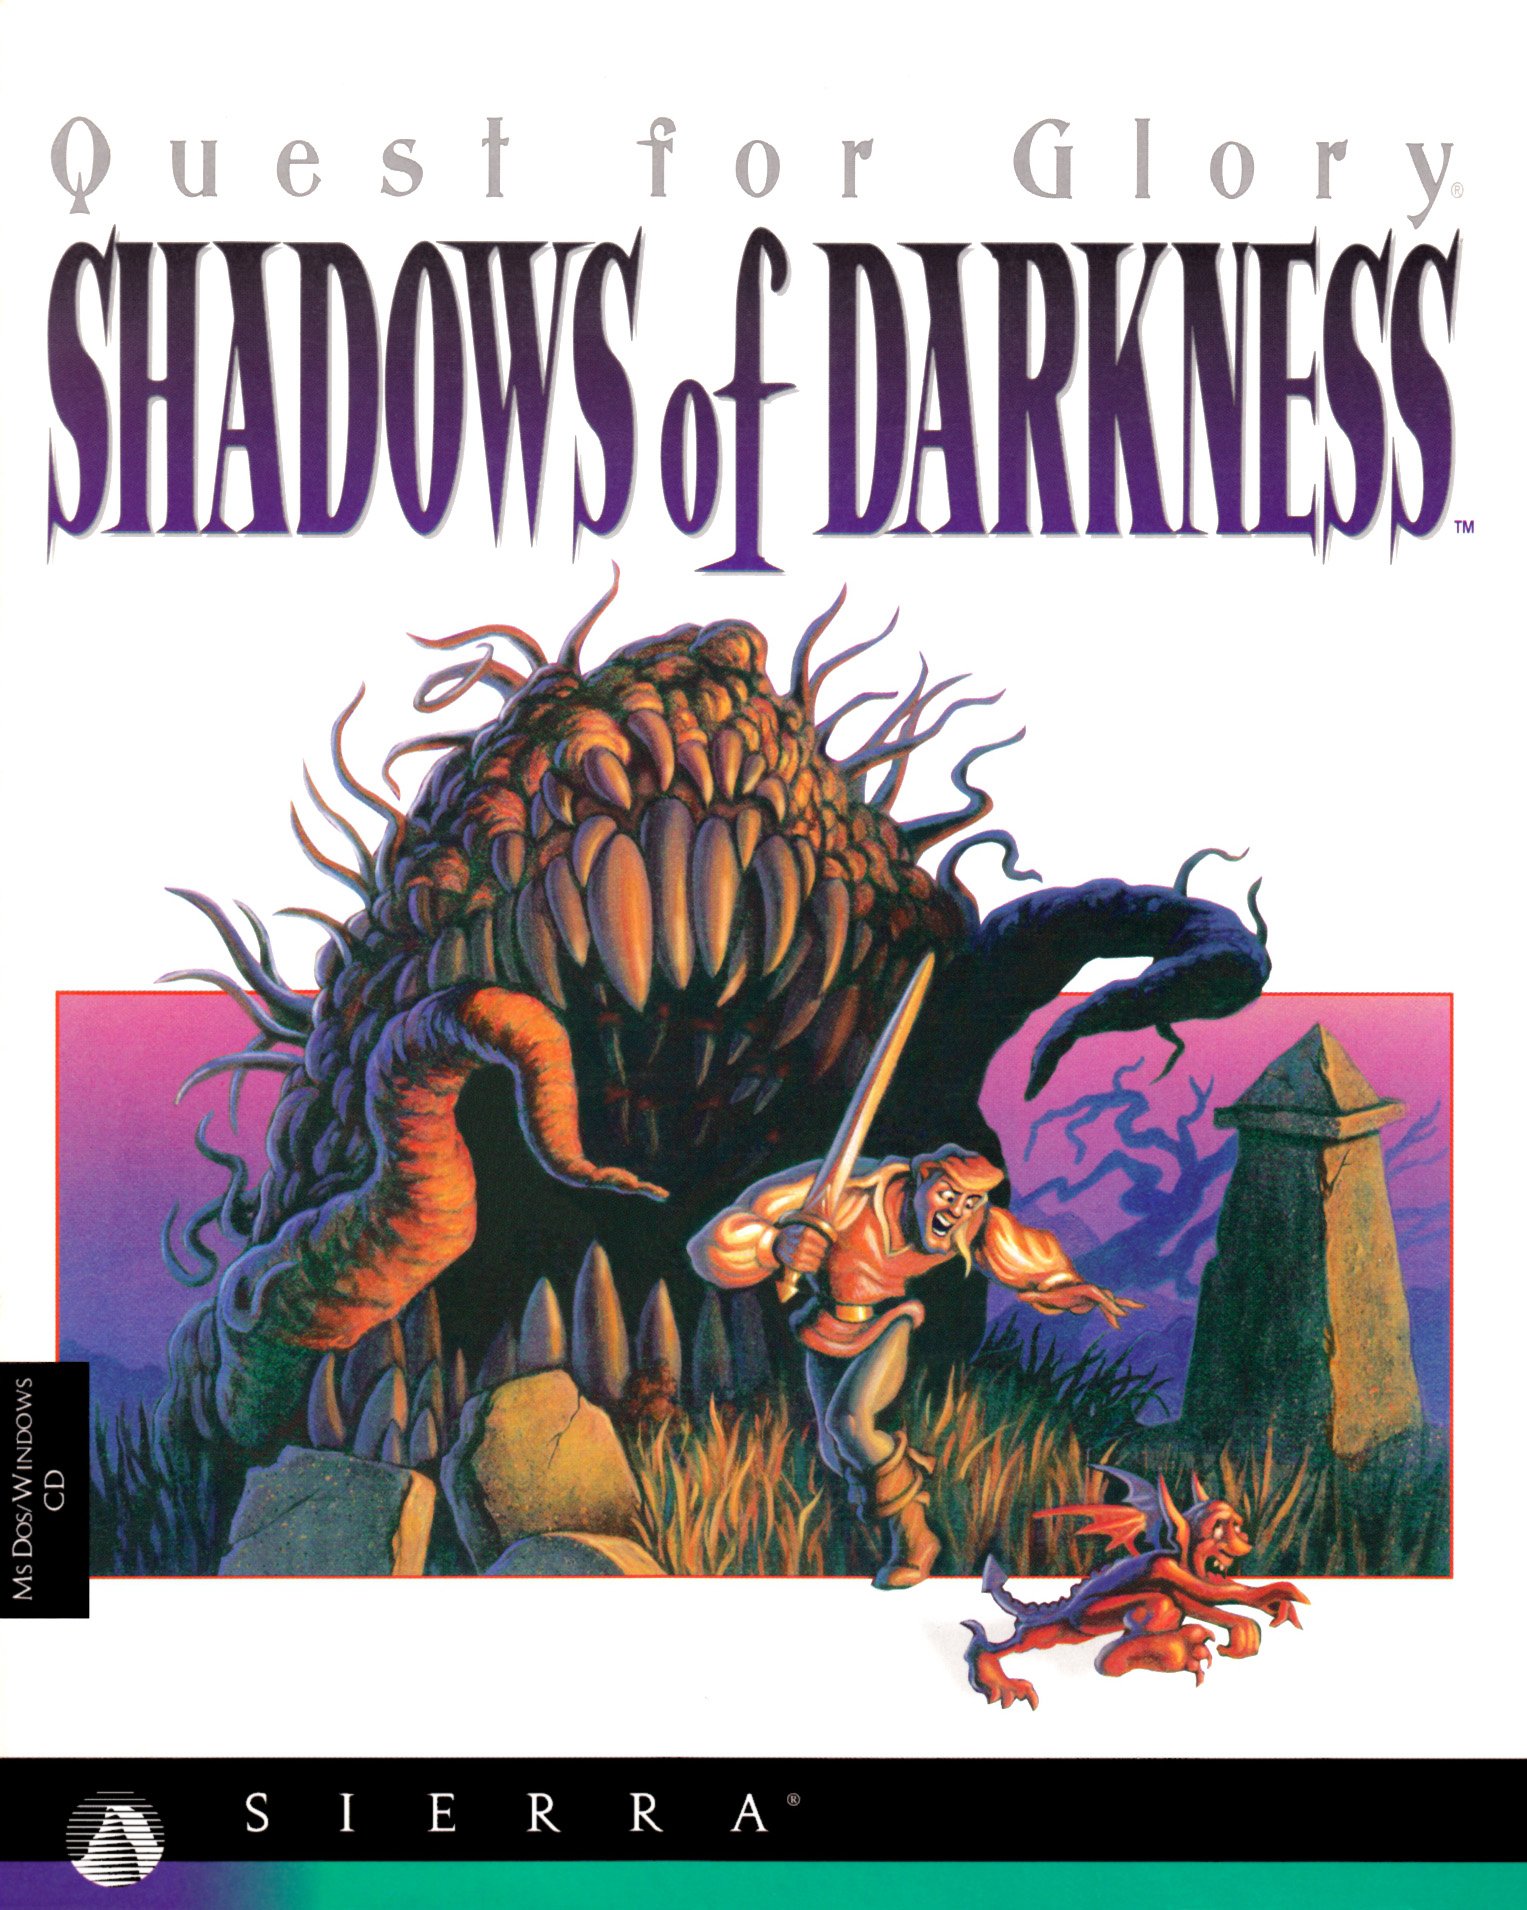 quest-for-glory-iv-shadows-of-darkness-video-game-box-art-id-186789